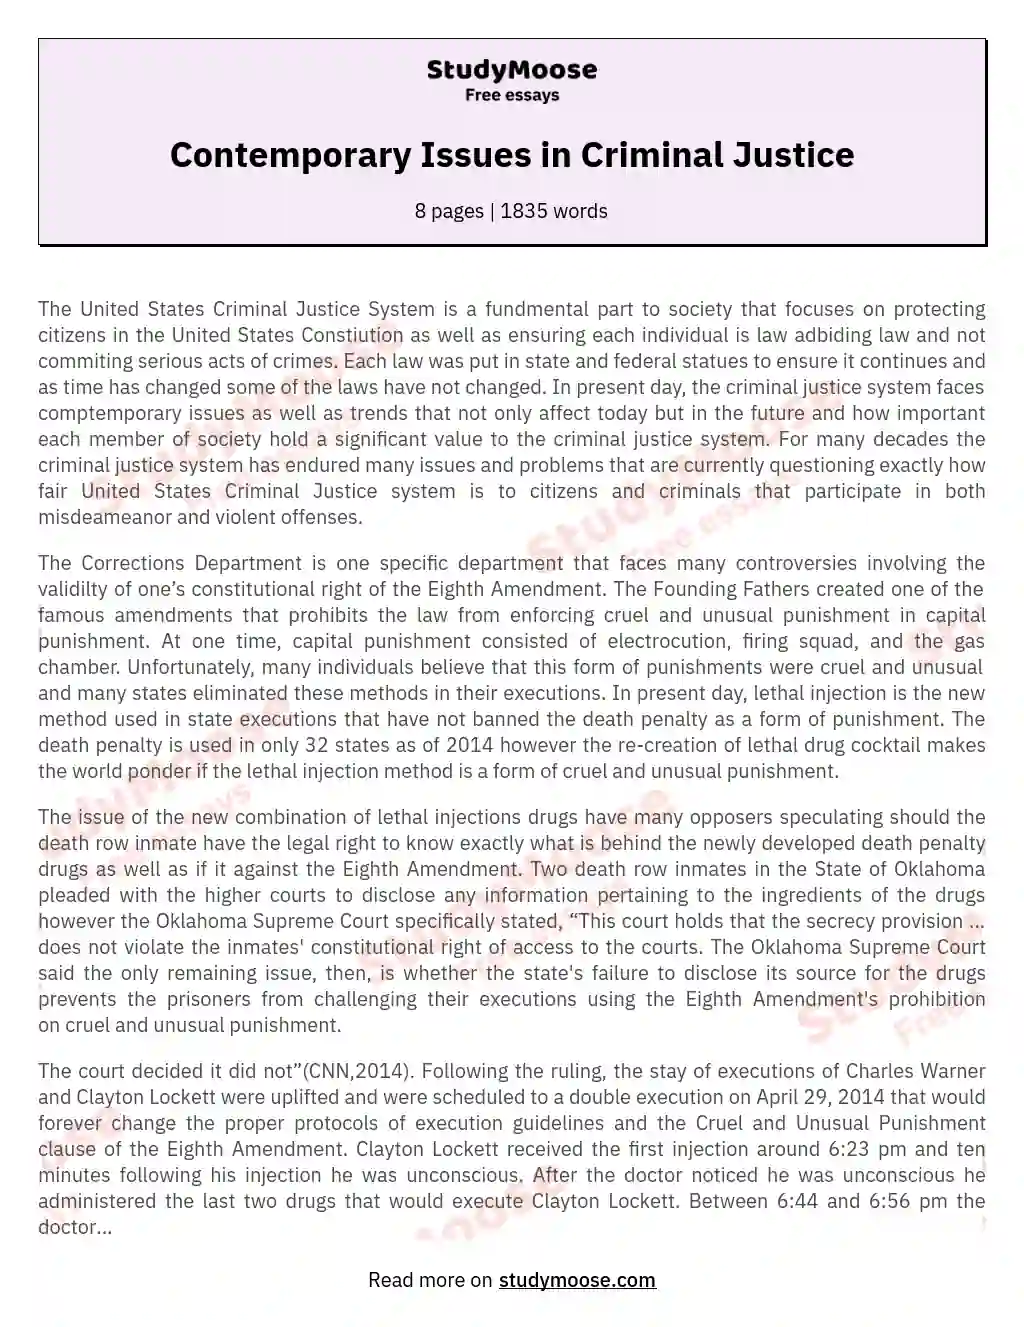 Реферат: Problems With The Criminal Justice Department Essay